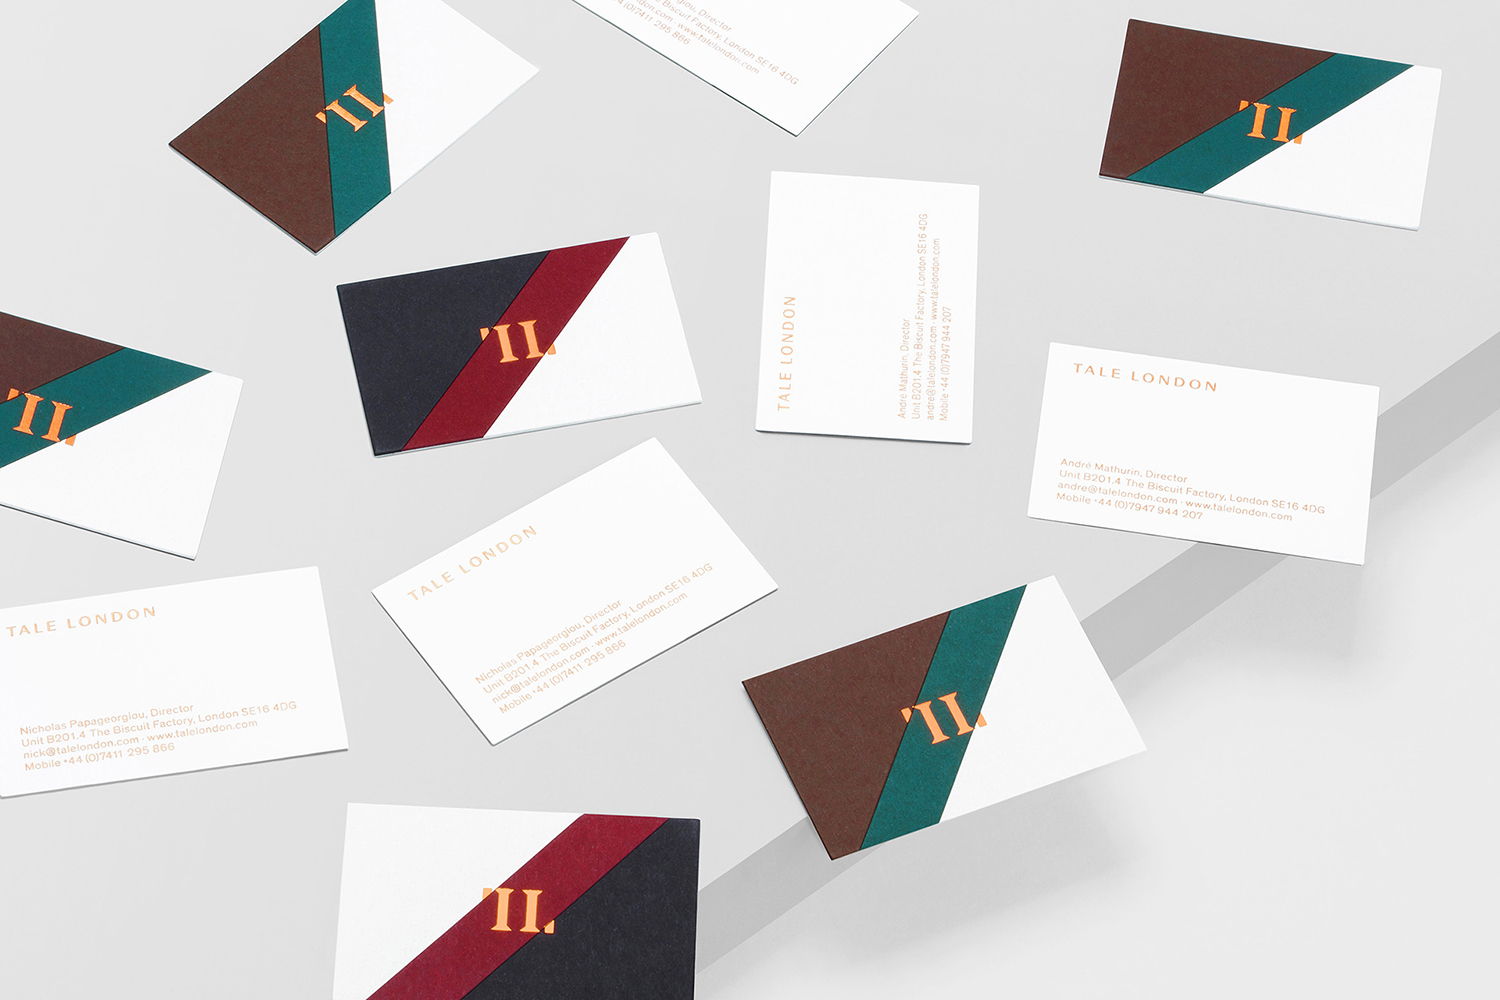 Copper foil embossed paper marquetry business cards by Two Times Elliott for architecture and interior design visualisation studio Tale London